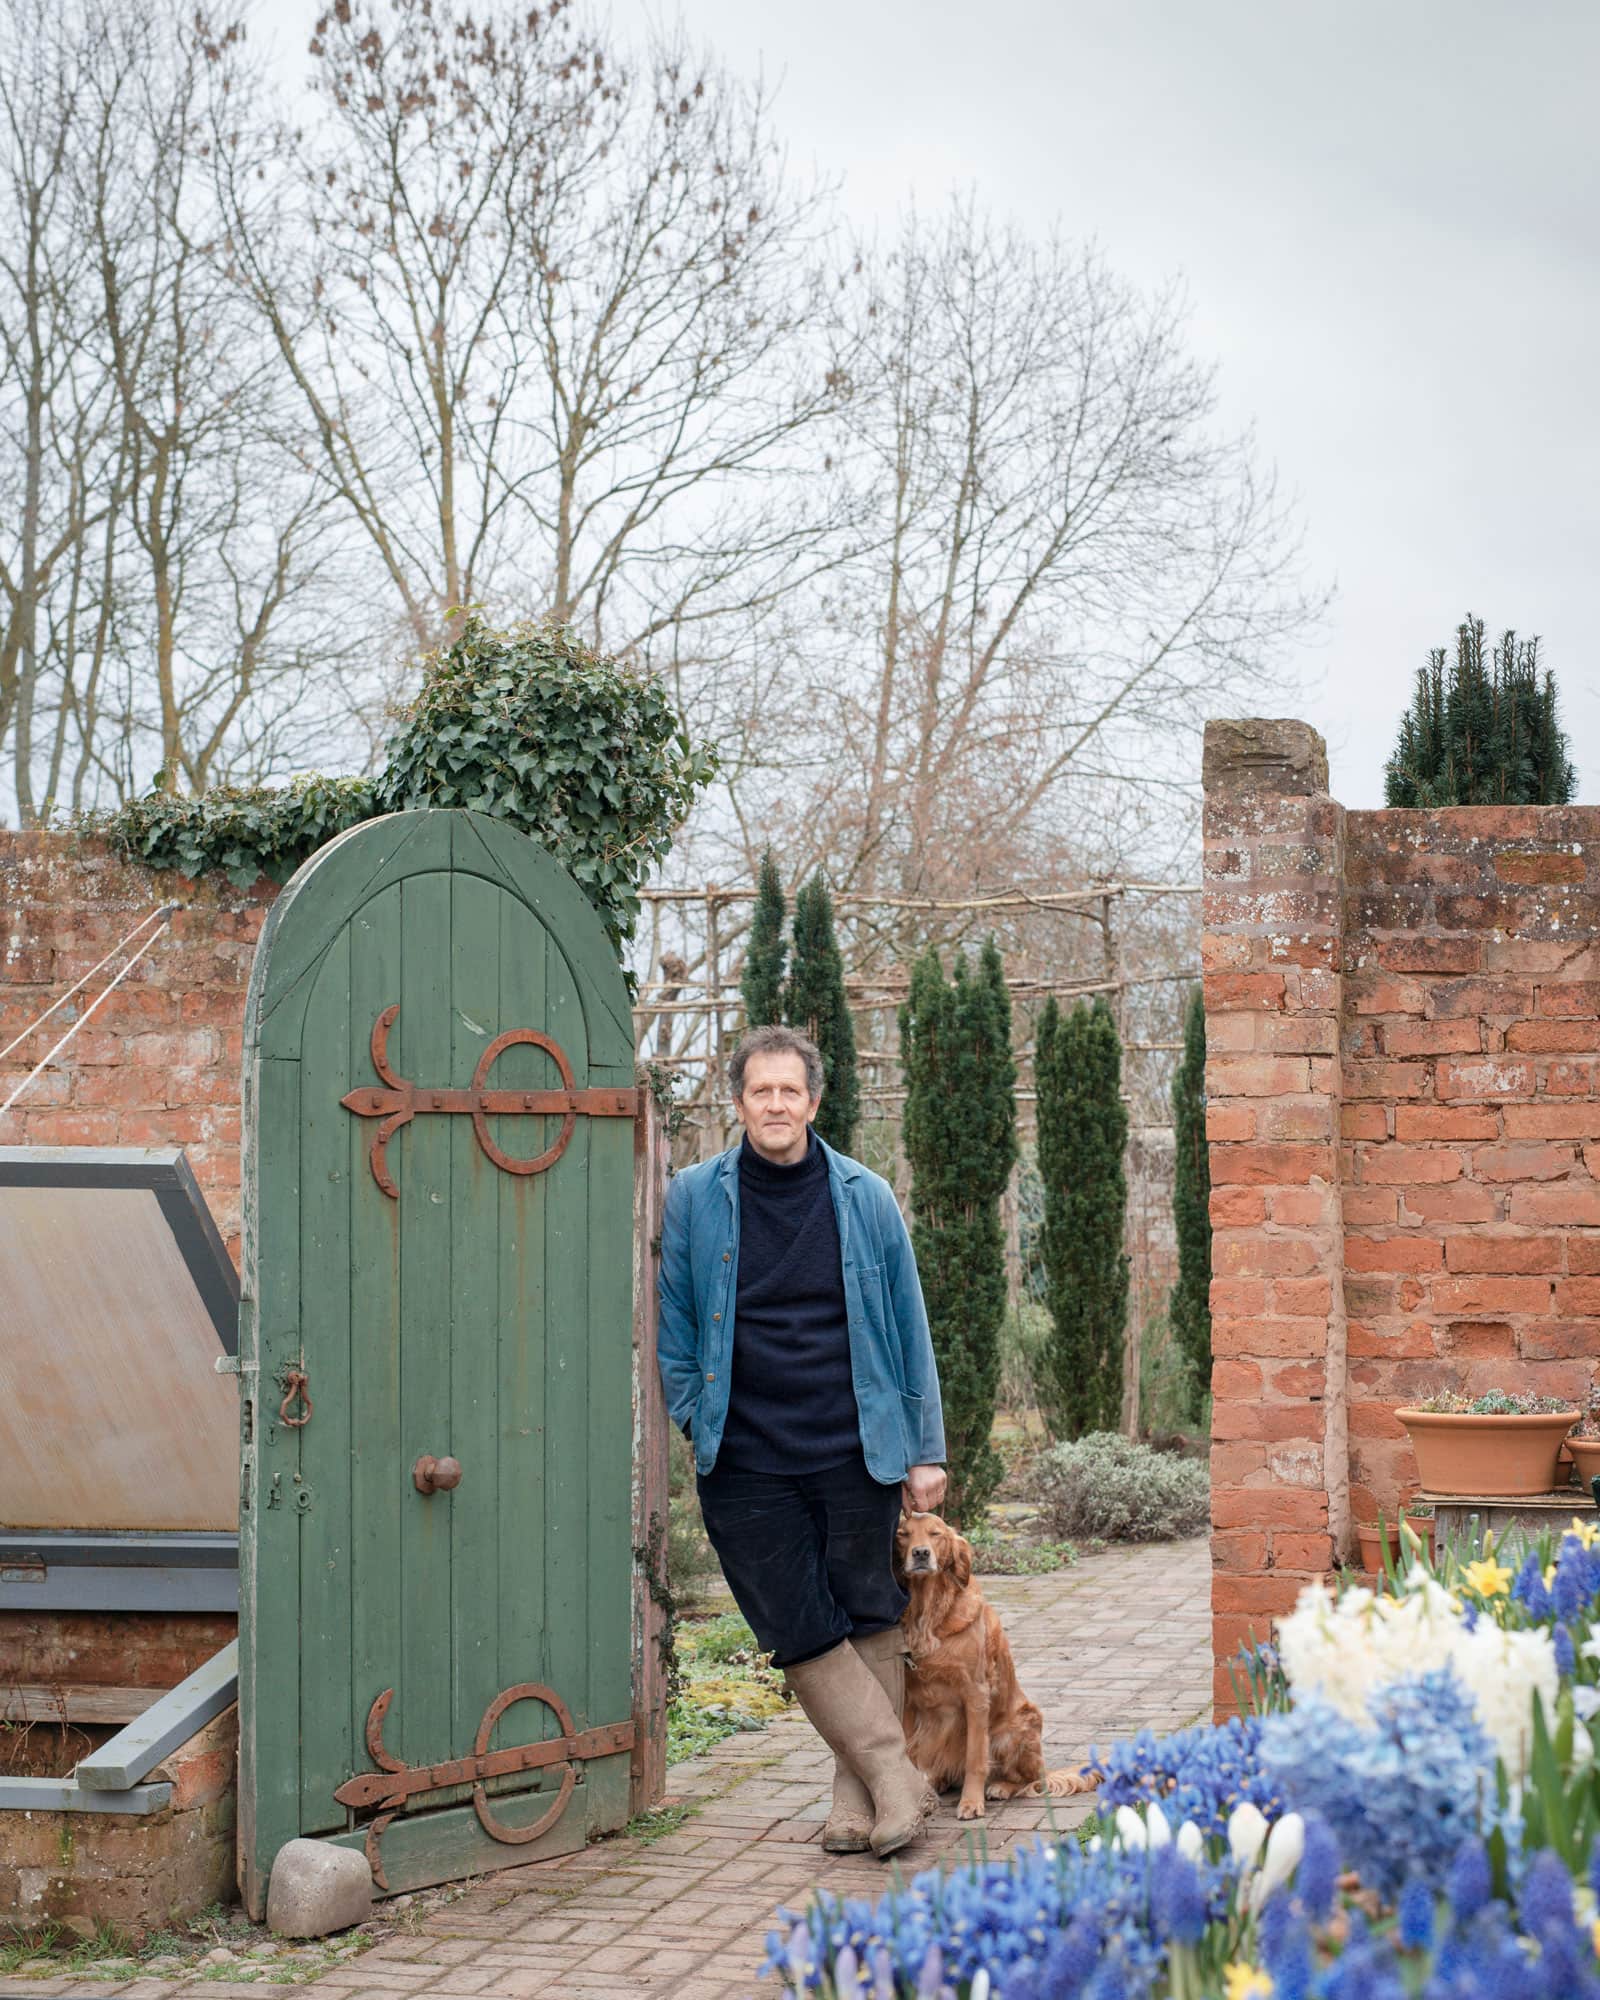 monty don; bbc; gardener's world; garden; nature; netflix; spring; outdoors; grow your own; vegetable; therapy; mental health; new york times; herefordshire; portrait; portraiture; photographer